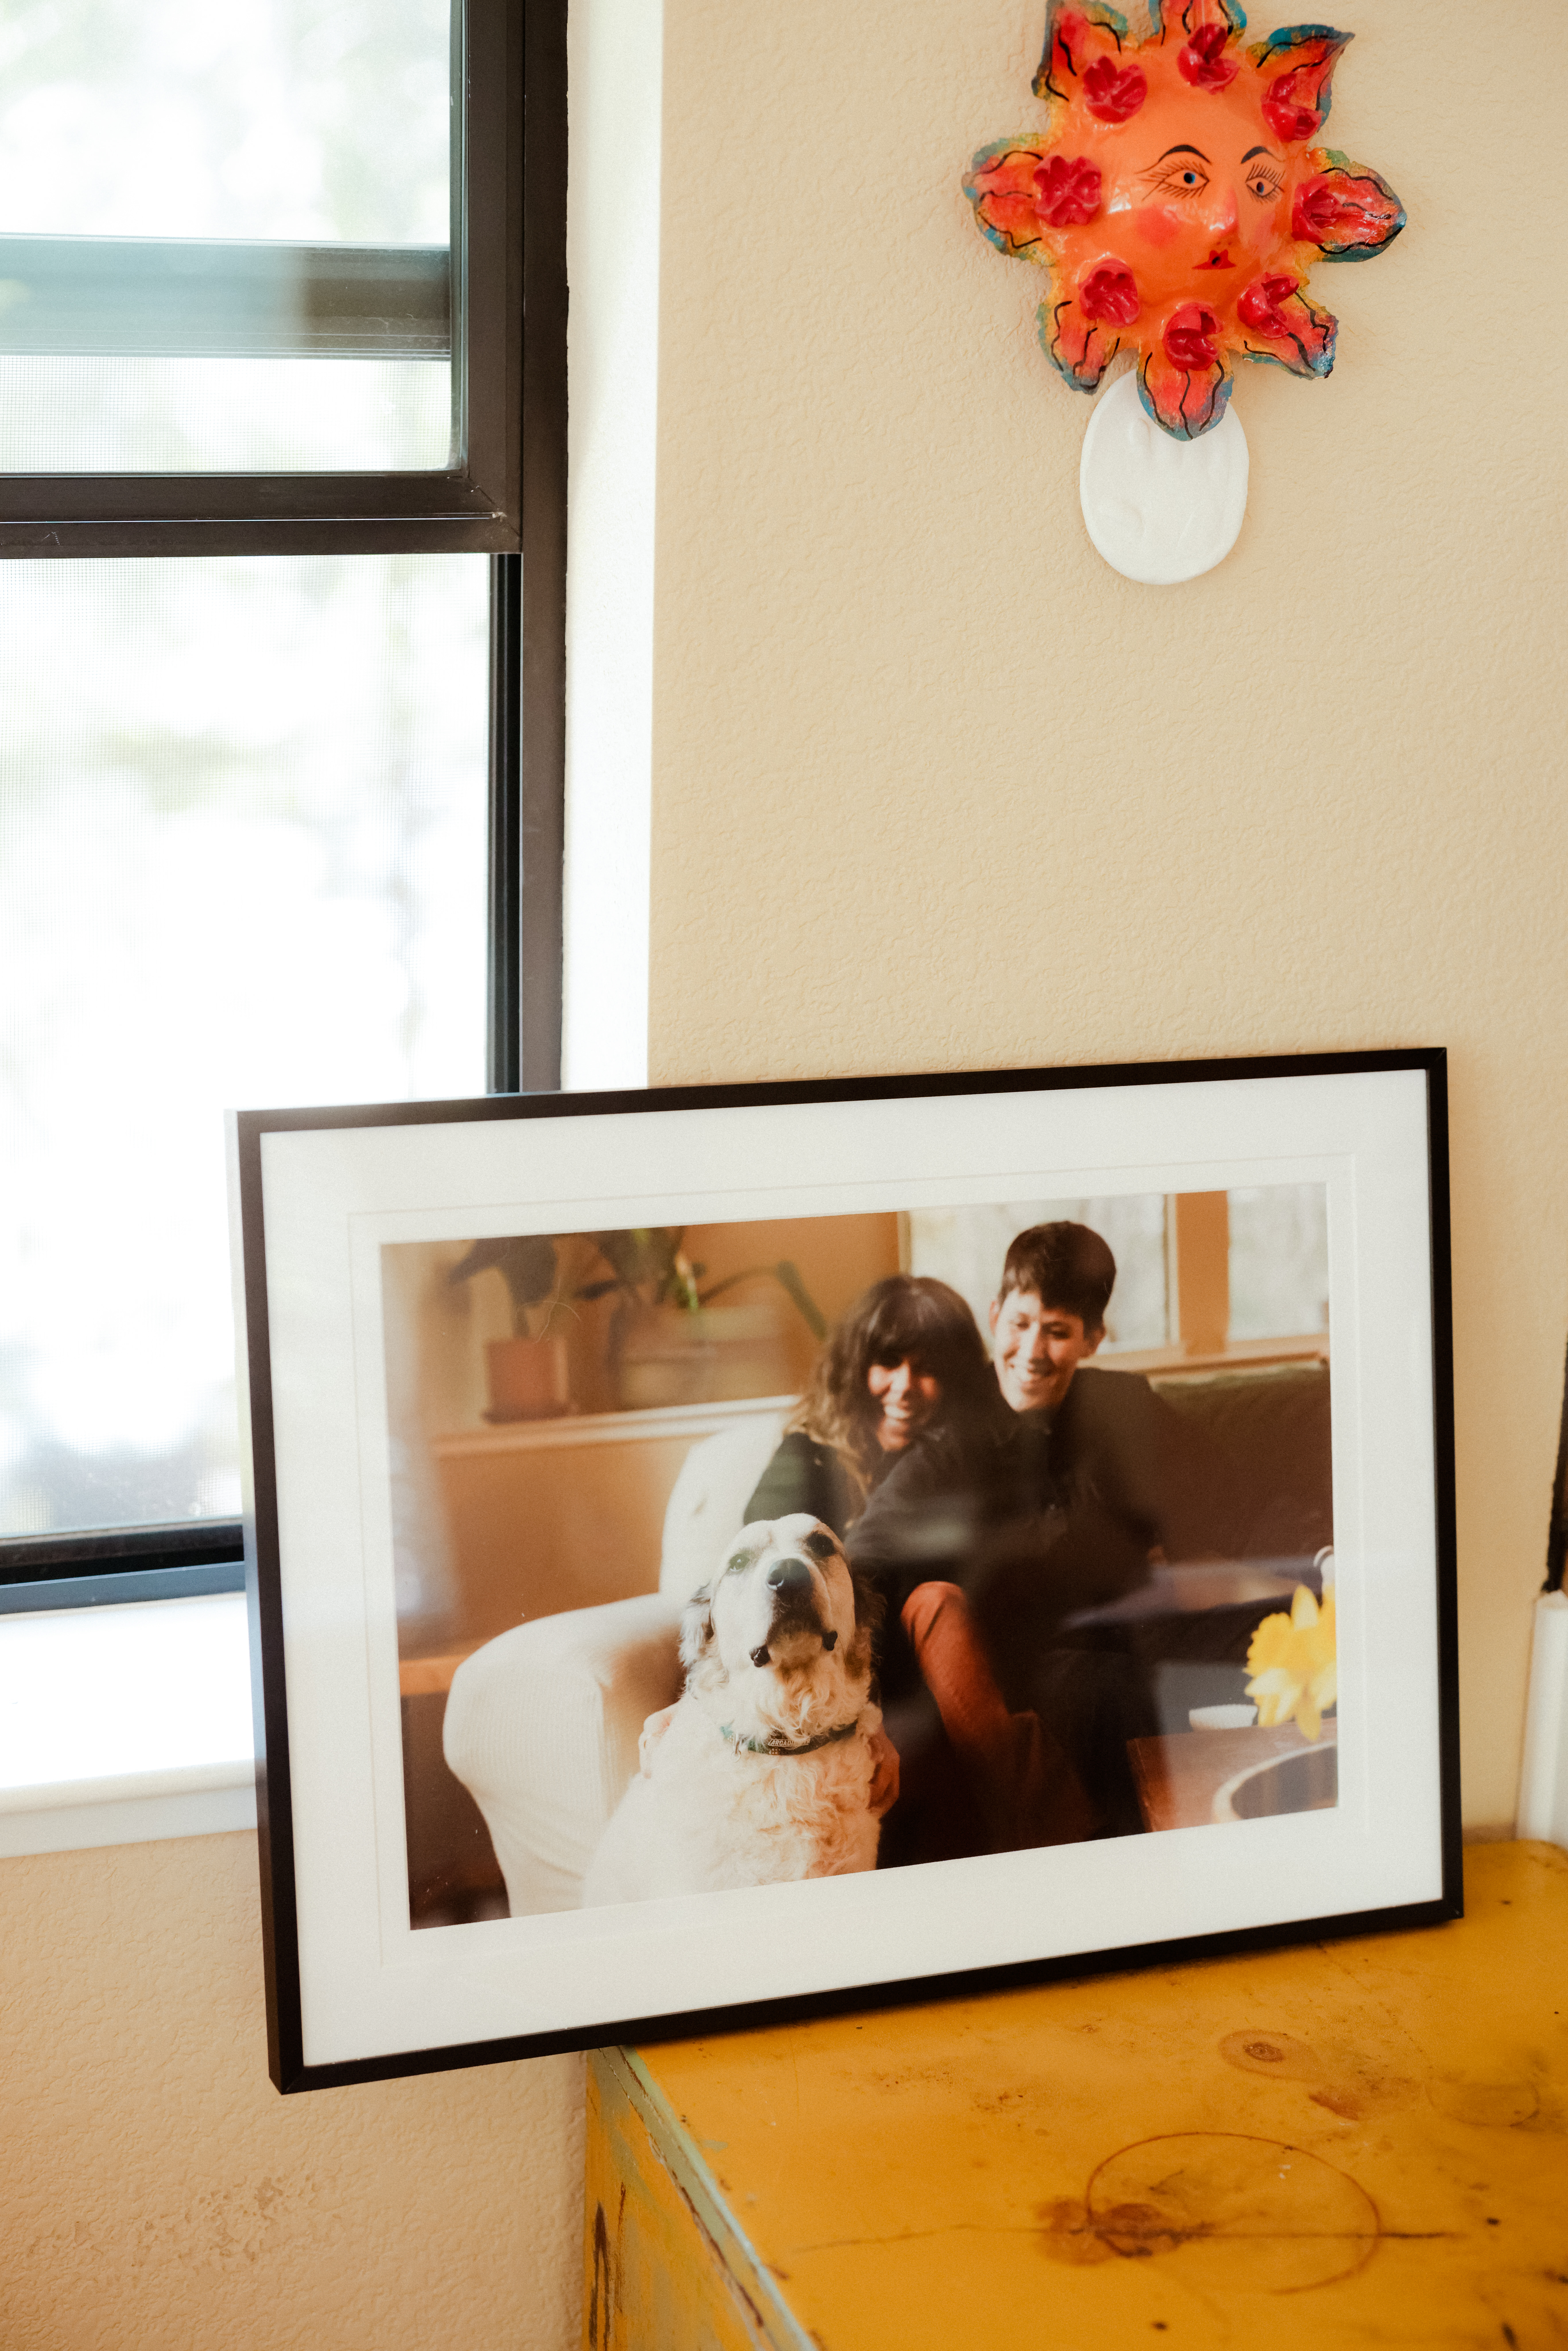 At Home Photoshoot: A family photoshoot framed (including a cute pooch!)